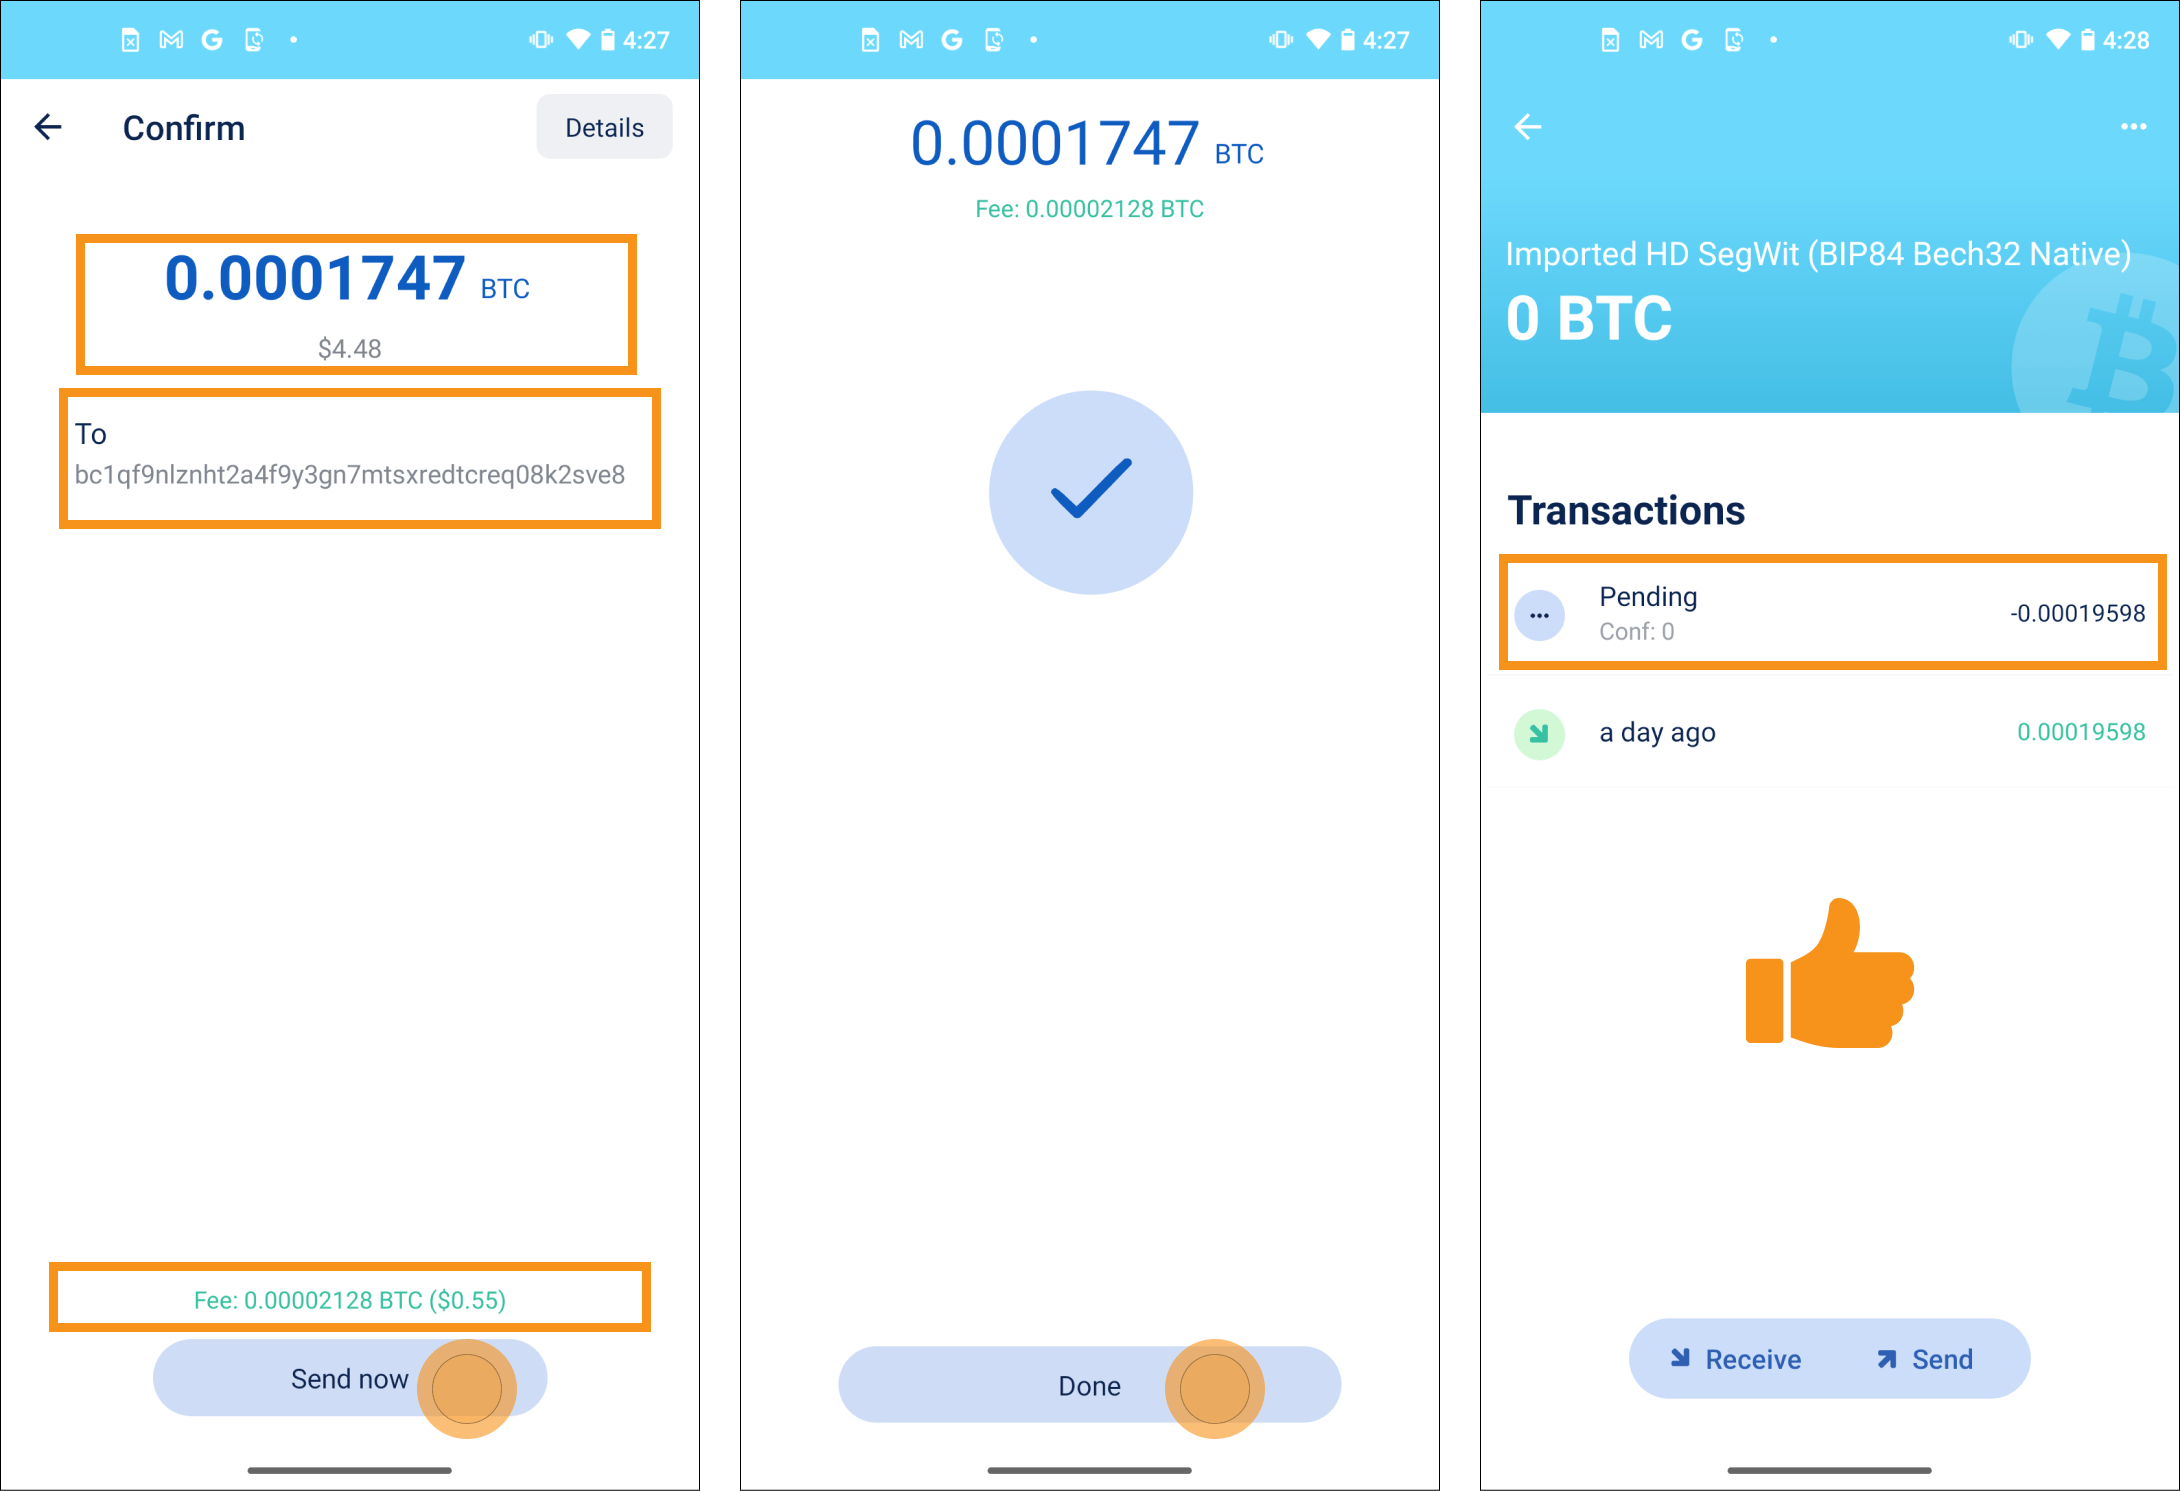 Screens indicating a successfully sent transaction